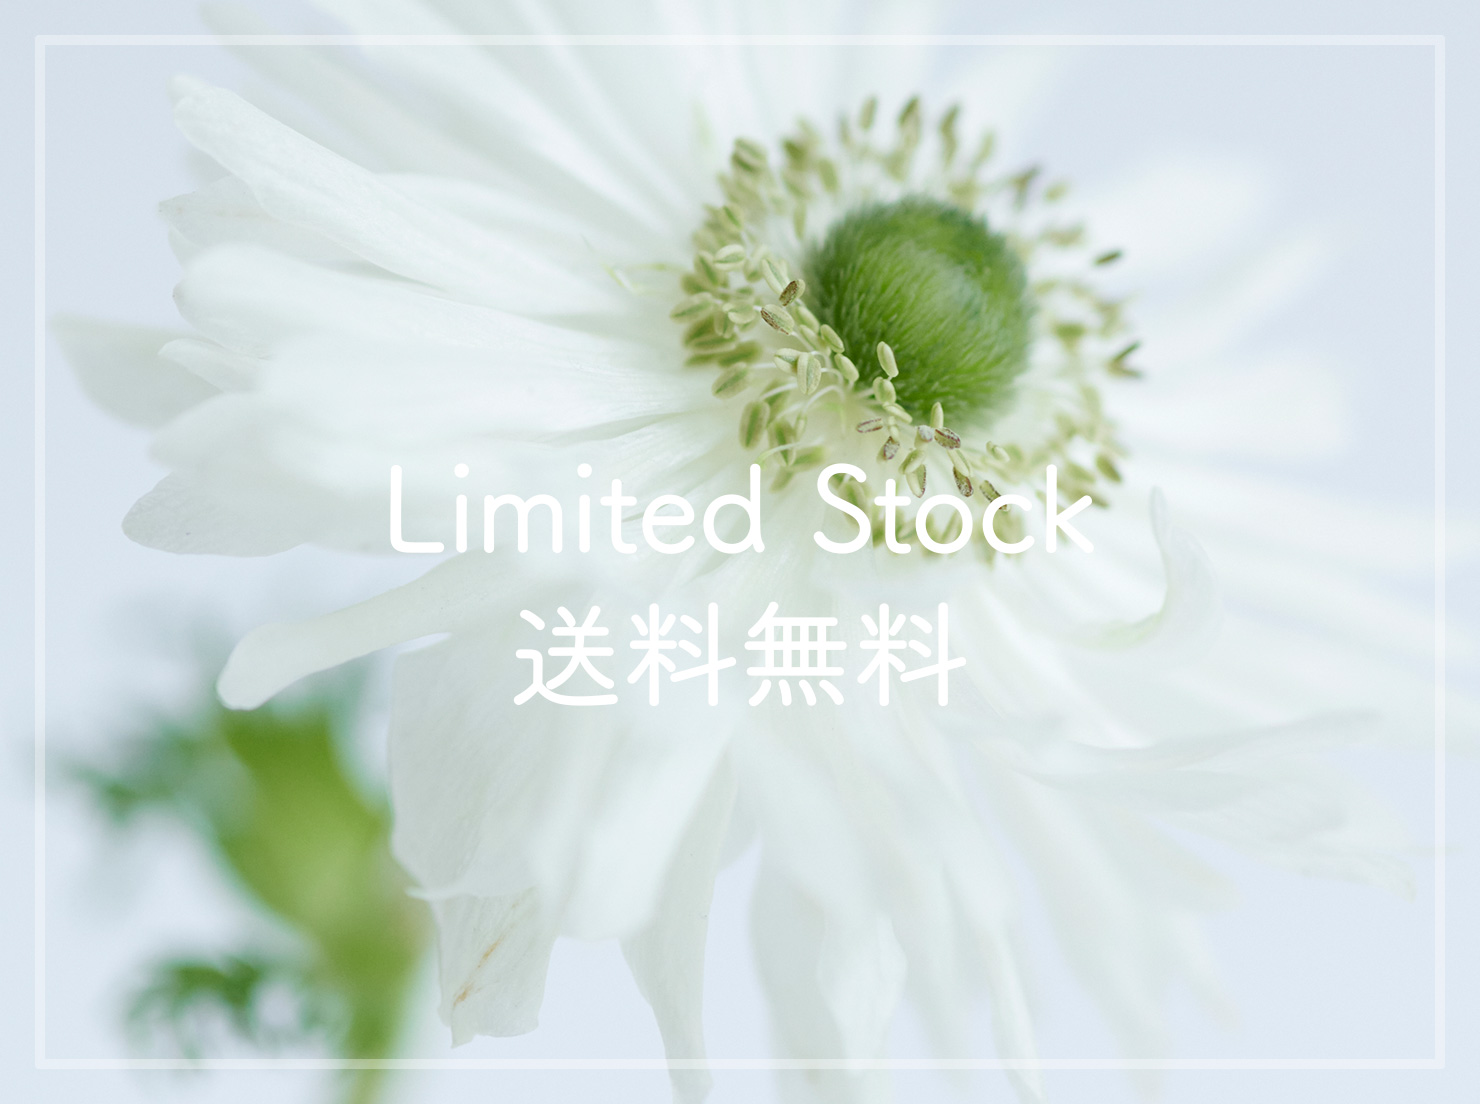 “limited stock”送料無料キャンペーン